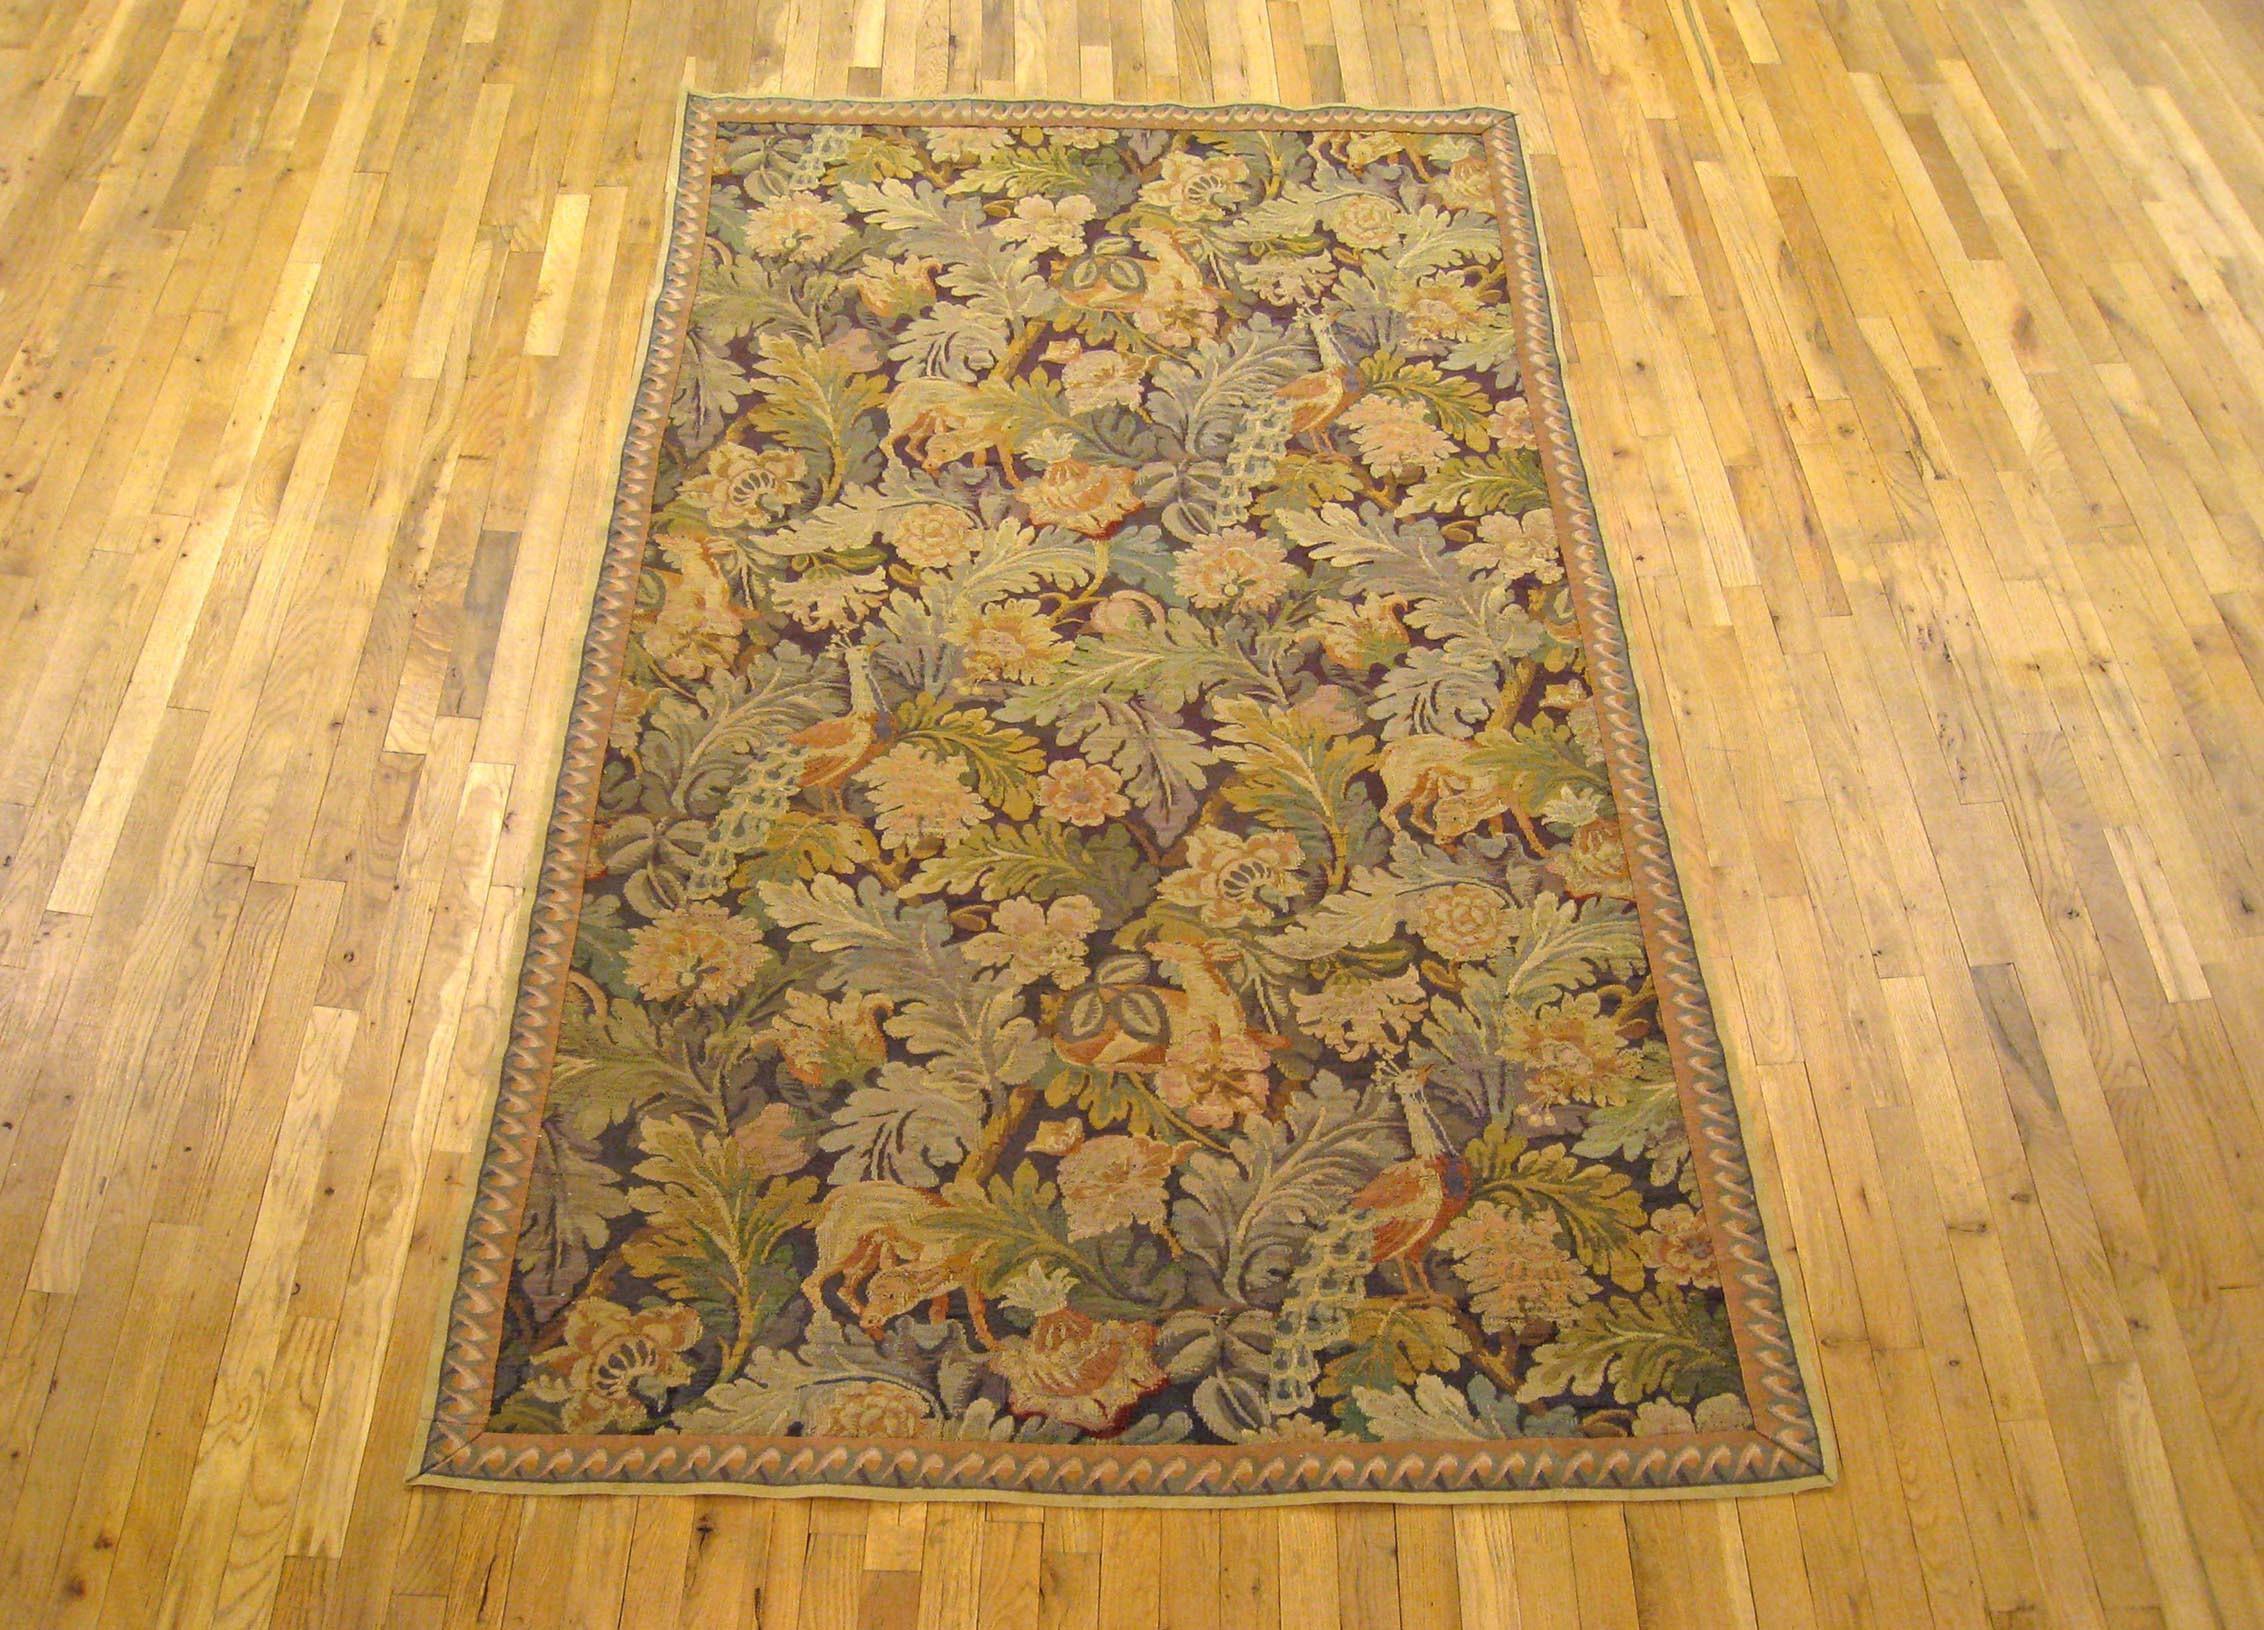 An English William Morris verdure tapestry from the turn of the 20th century, featuring several peacocks within a verdant setting of large leaves and floral sprays. Enclosed within an elegant ribbon-twist border. Measures: 8’5” H x 4’8” W.

This